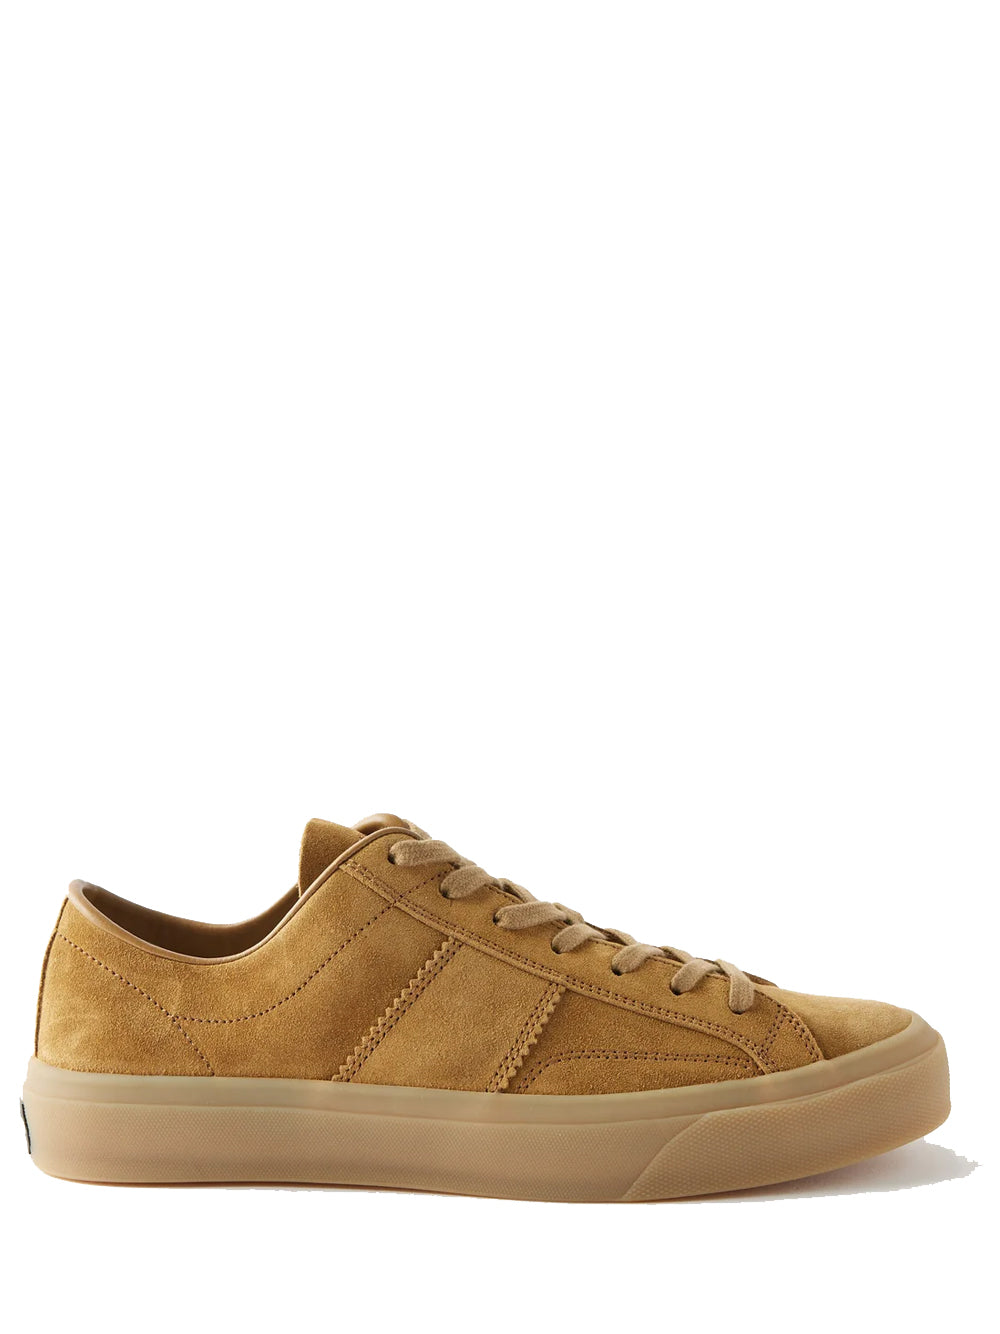 TOM FORD Cambridge Suede Sneakers Low-Top Trainers Brown - MAISONDEFASHION.COM